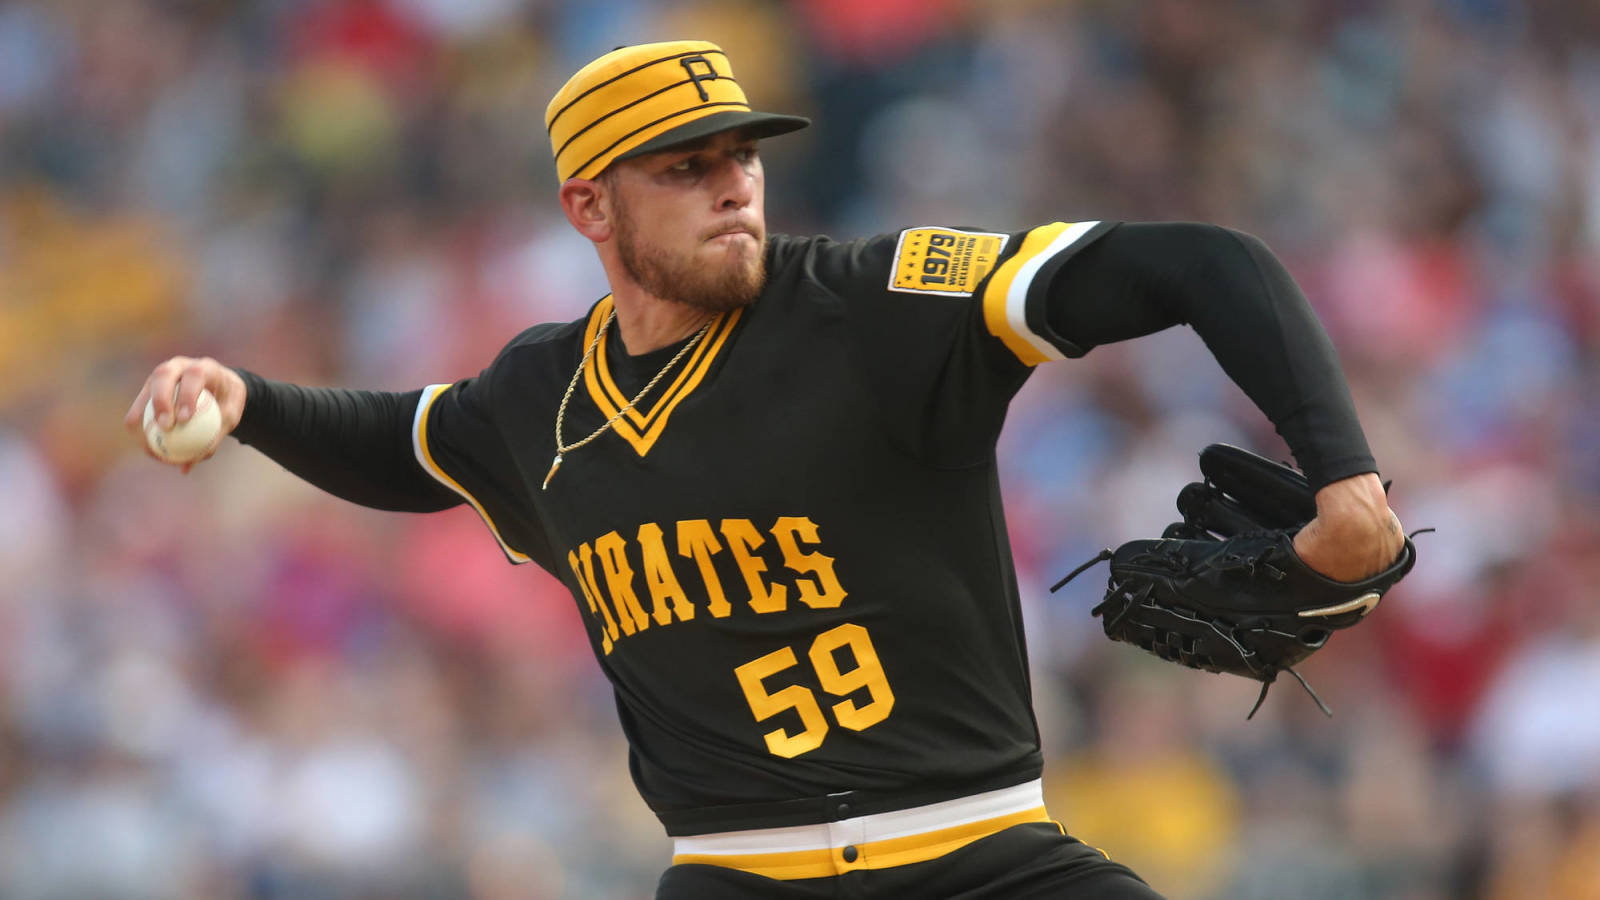 Pirates' 1979 throwbacks are absolute fire